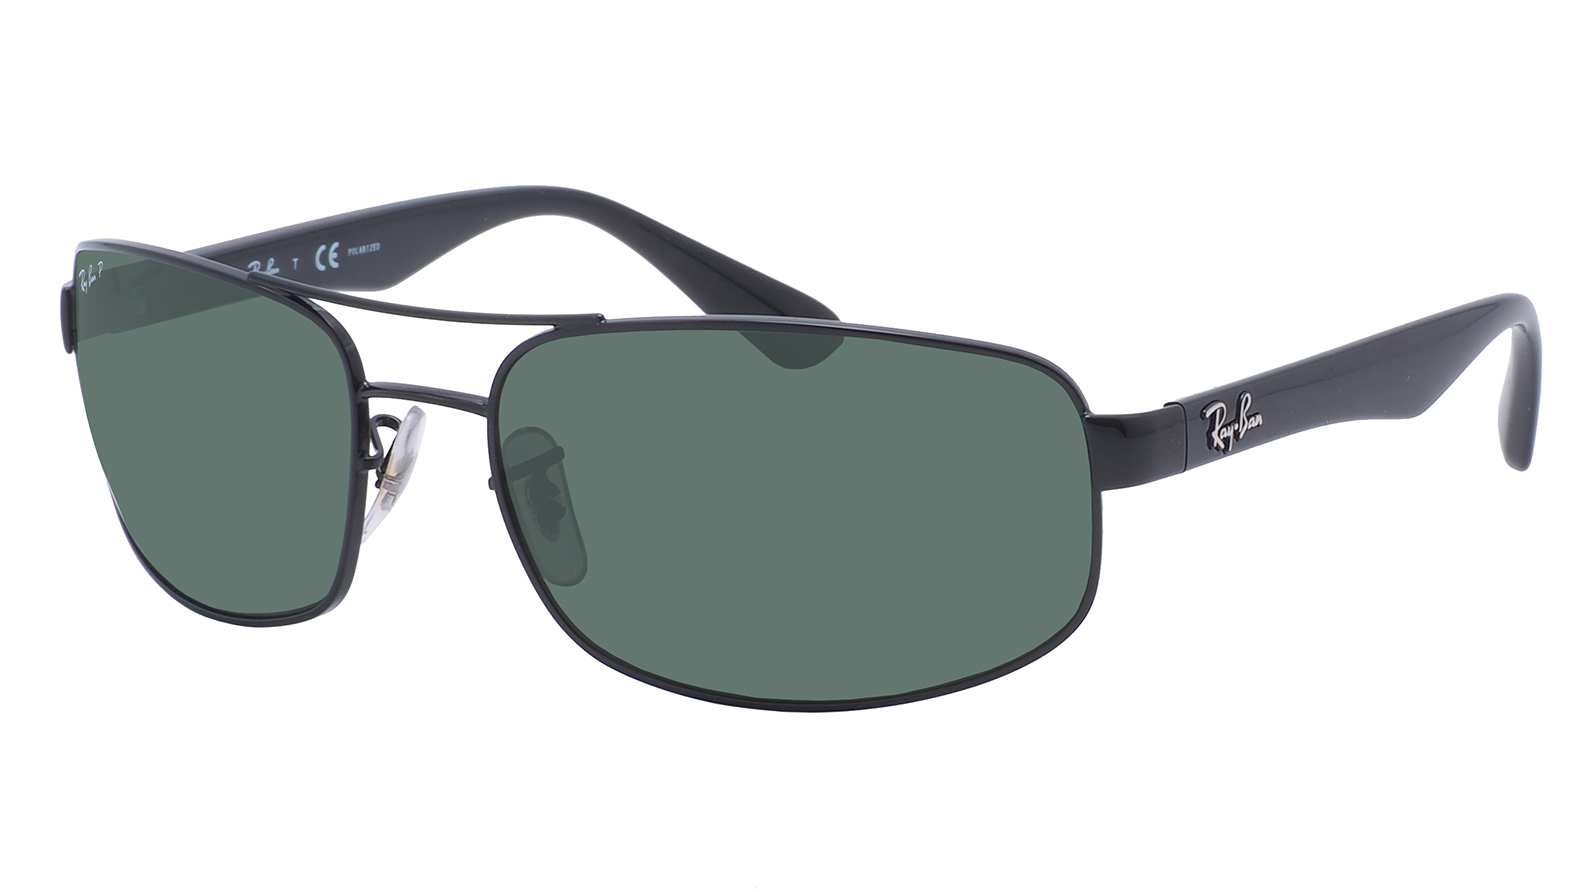 Ray-Ban Active Lifestyle RB 3445 002/58 ray ban active lifestyle rx 6285 2503